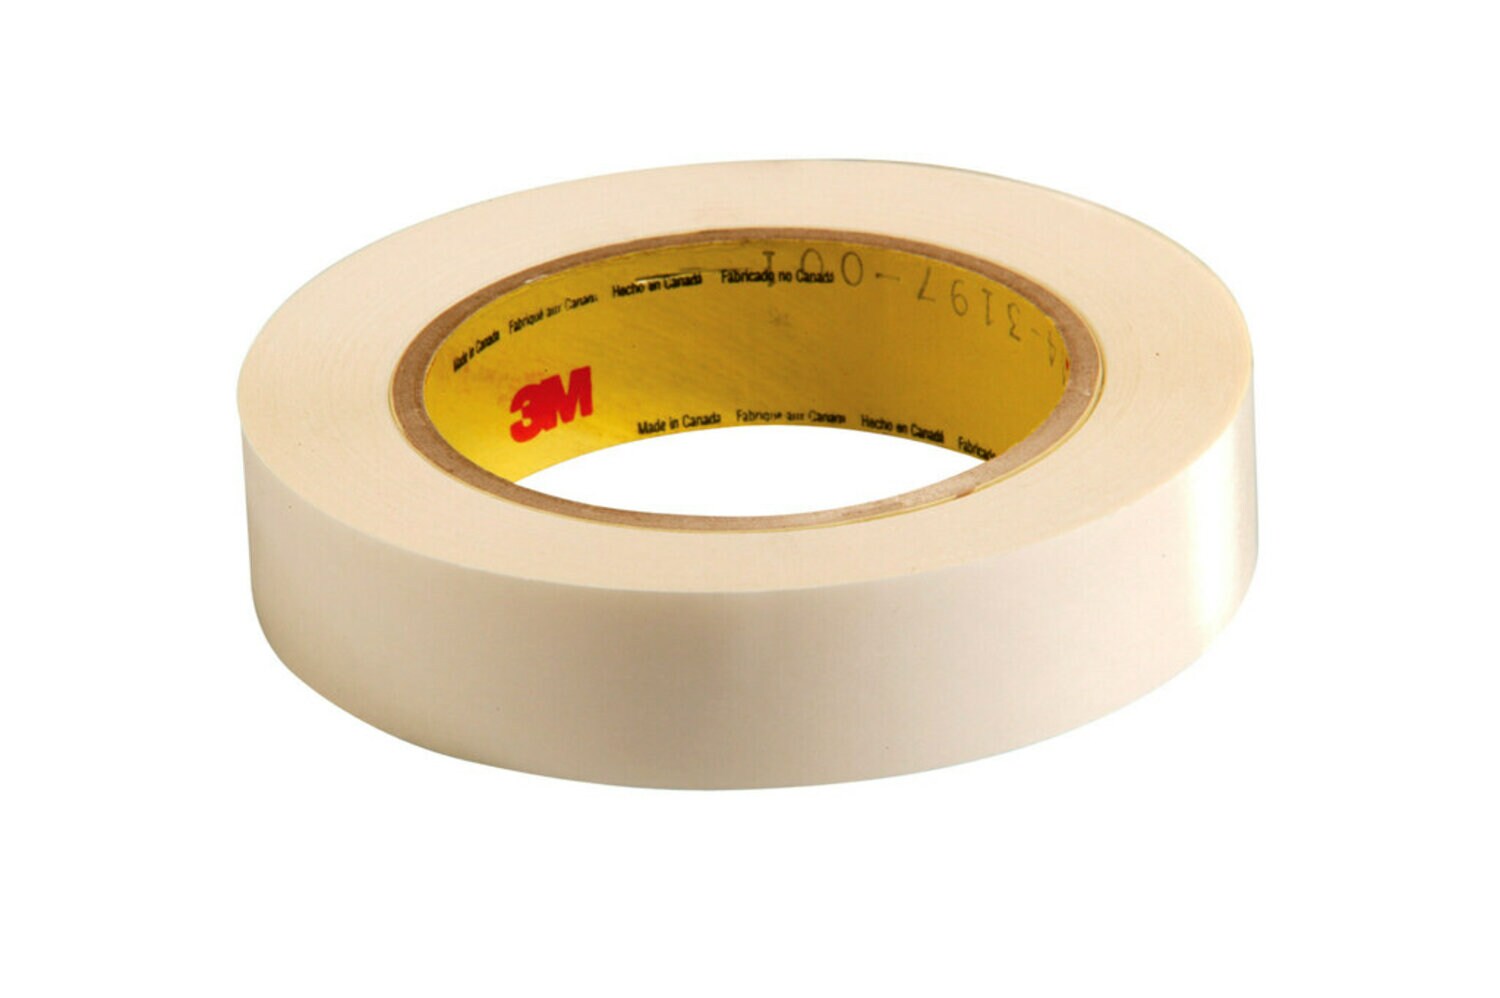 7010291442 - 3M Double Coated Tape 444, Clear, 48 in x 108 yd, 3.9 mil, 1 roll per
case